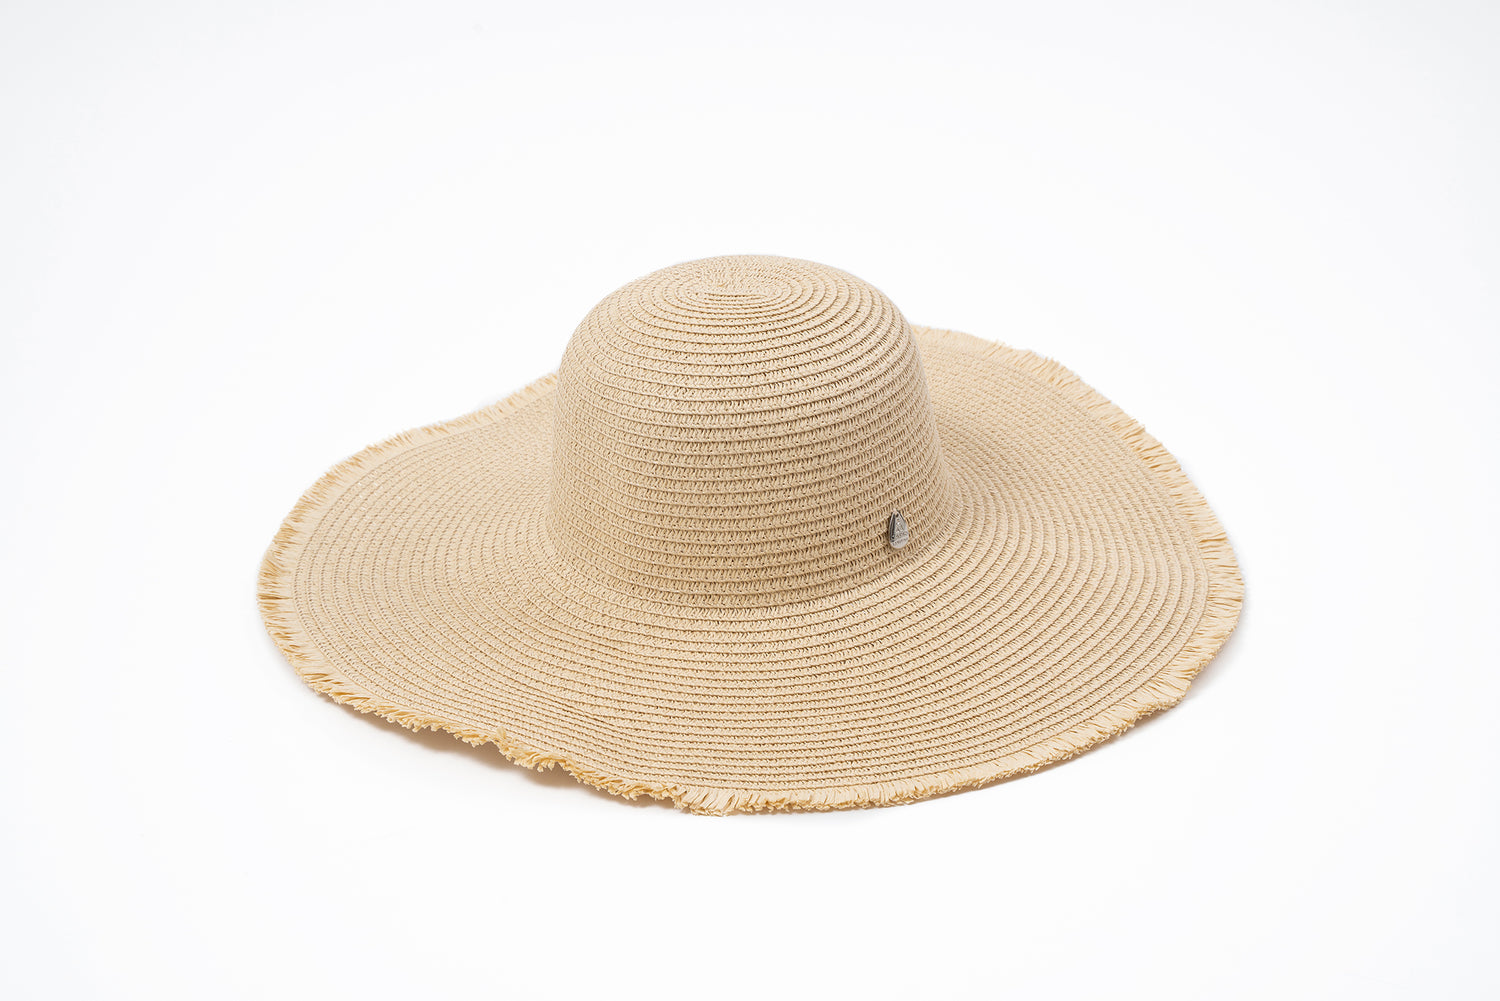 Floppy Straw Hat with Frill Edges